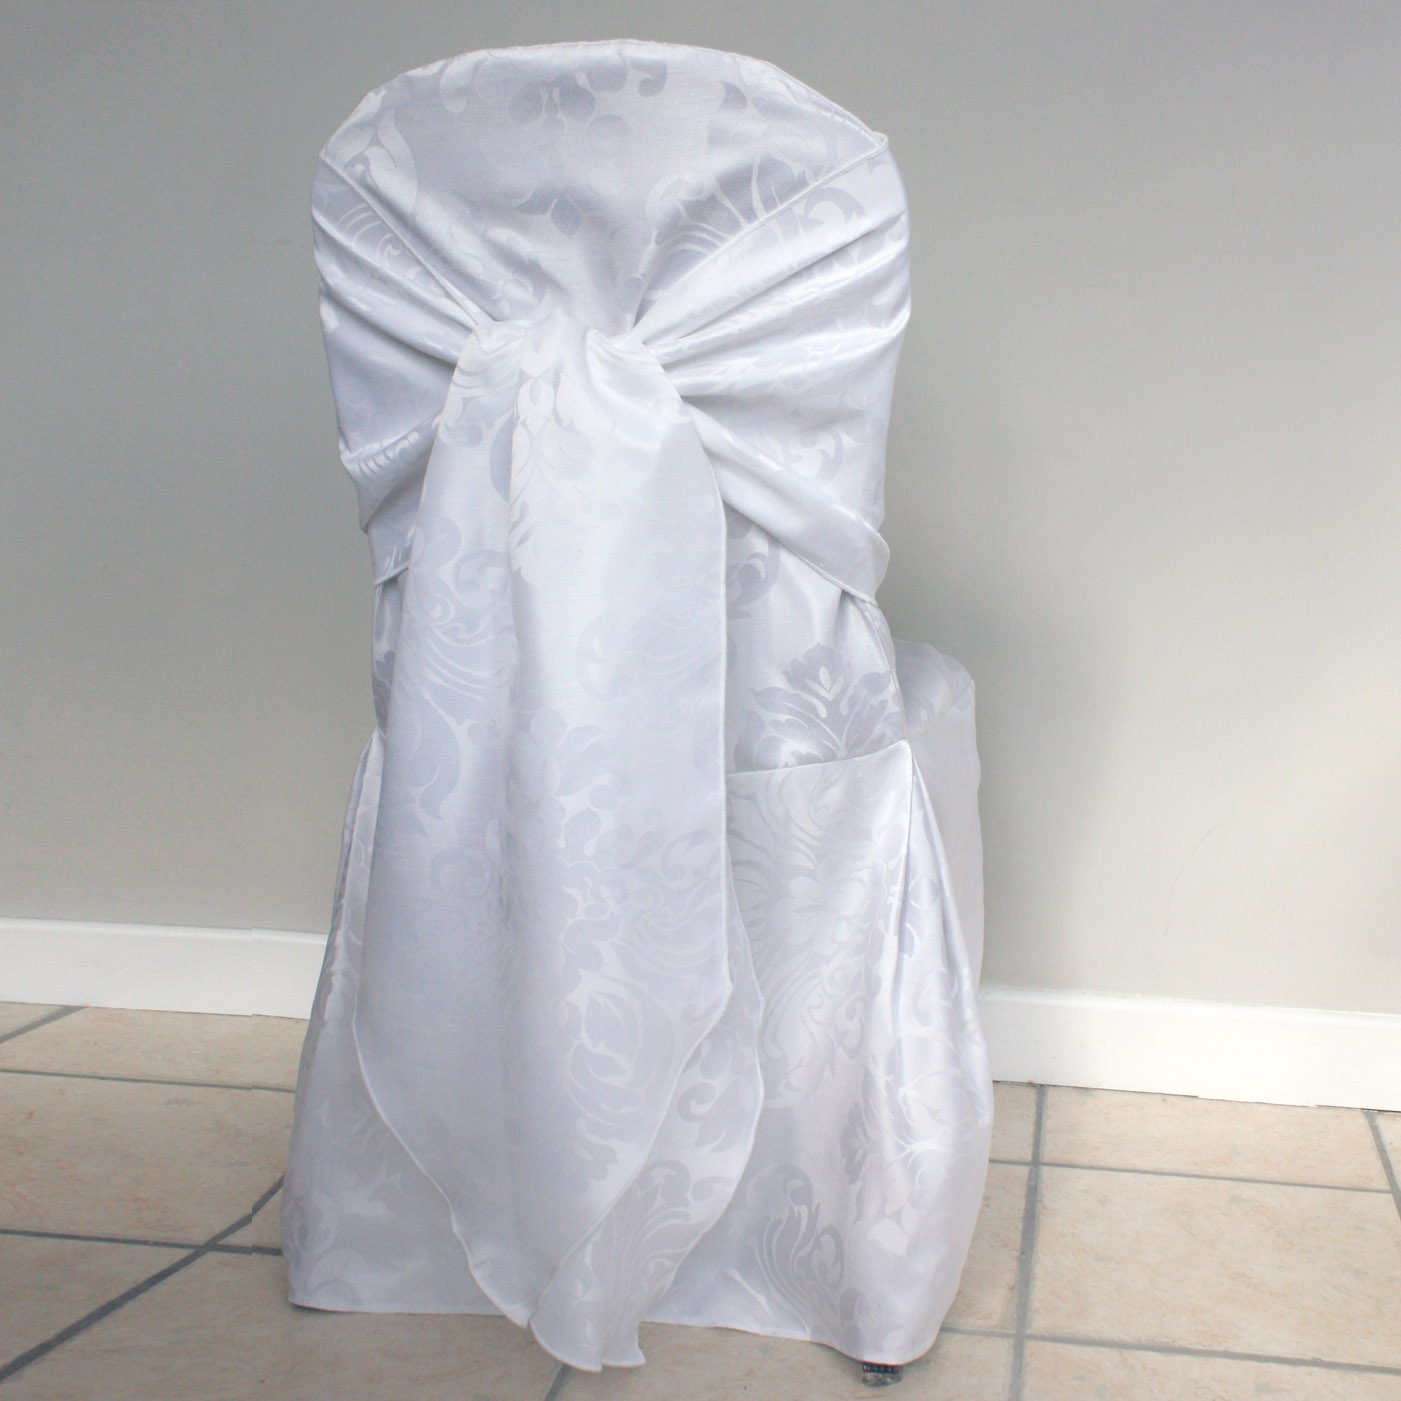 Hire Wedding Chair Covers Northern Ireland View Our Selection